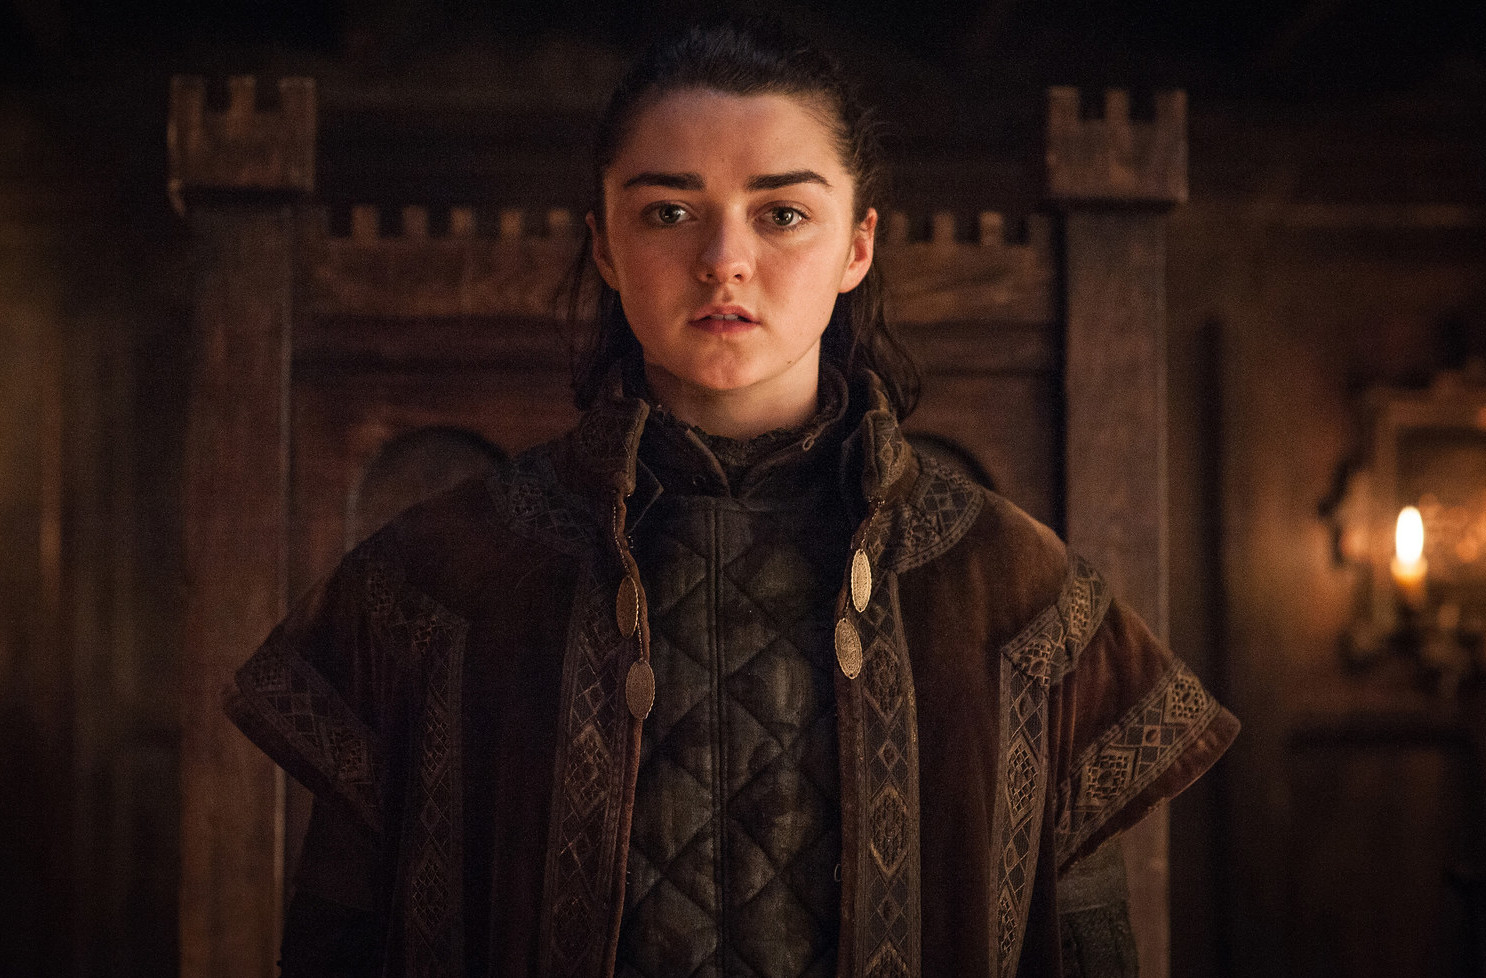 I'm just gonna come right out and say it: If there's one character that should survive Game of Thrones in the end it's Arya Stark.